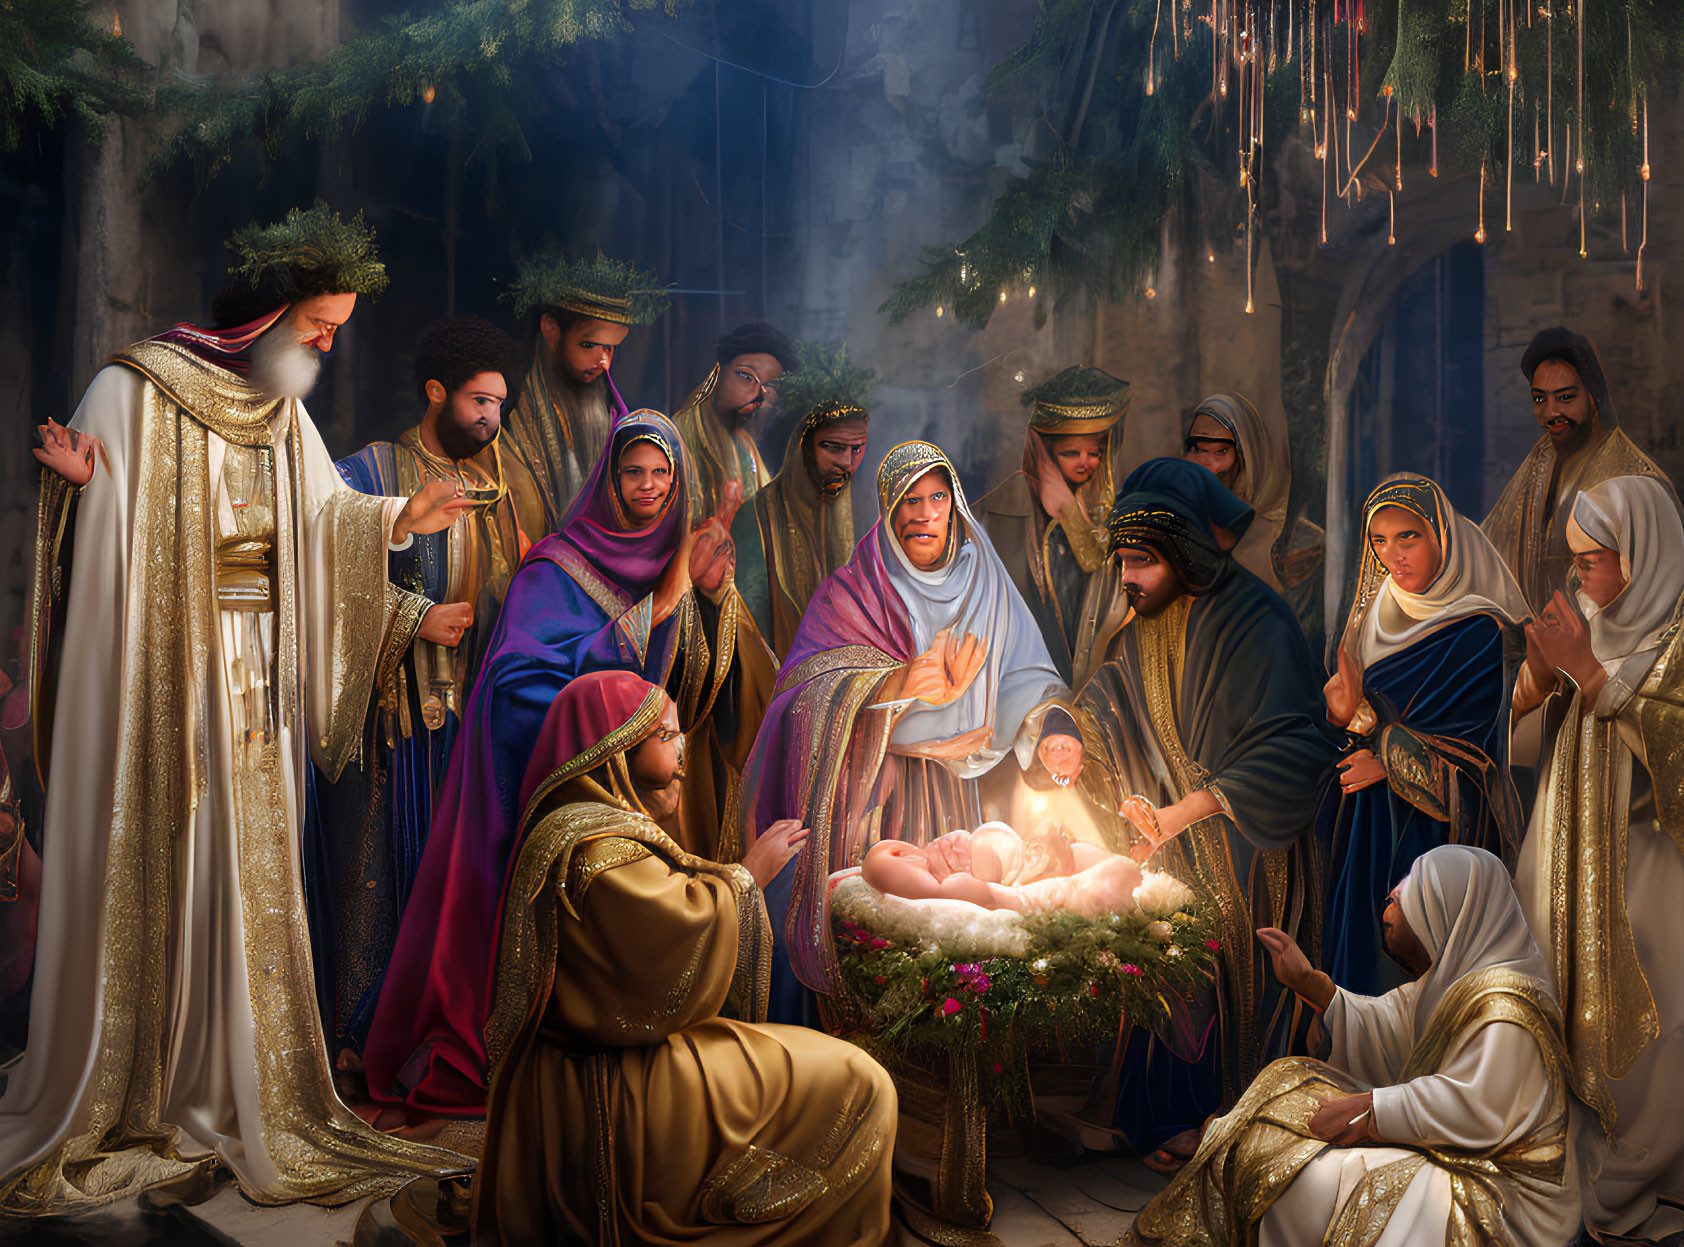 Historical Nativity Scene with Reverent Figures and Soft Light